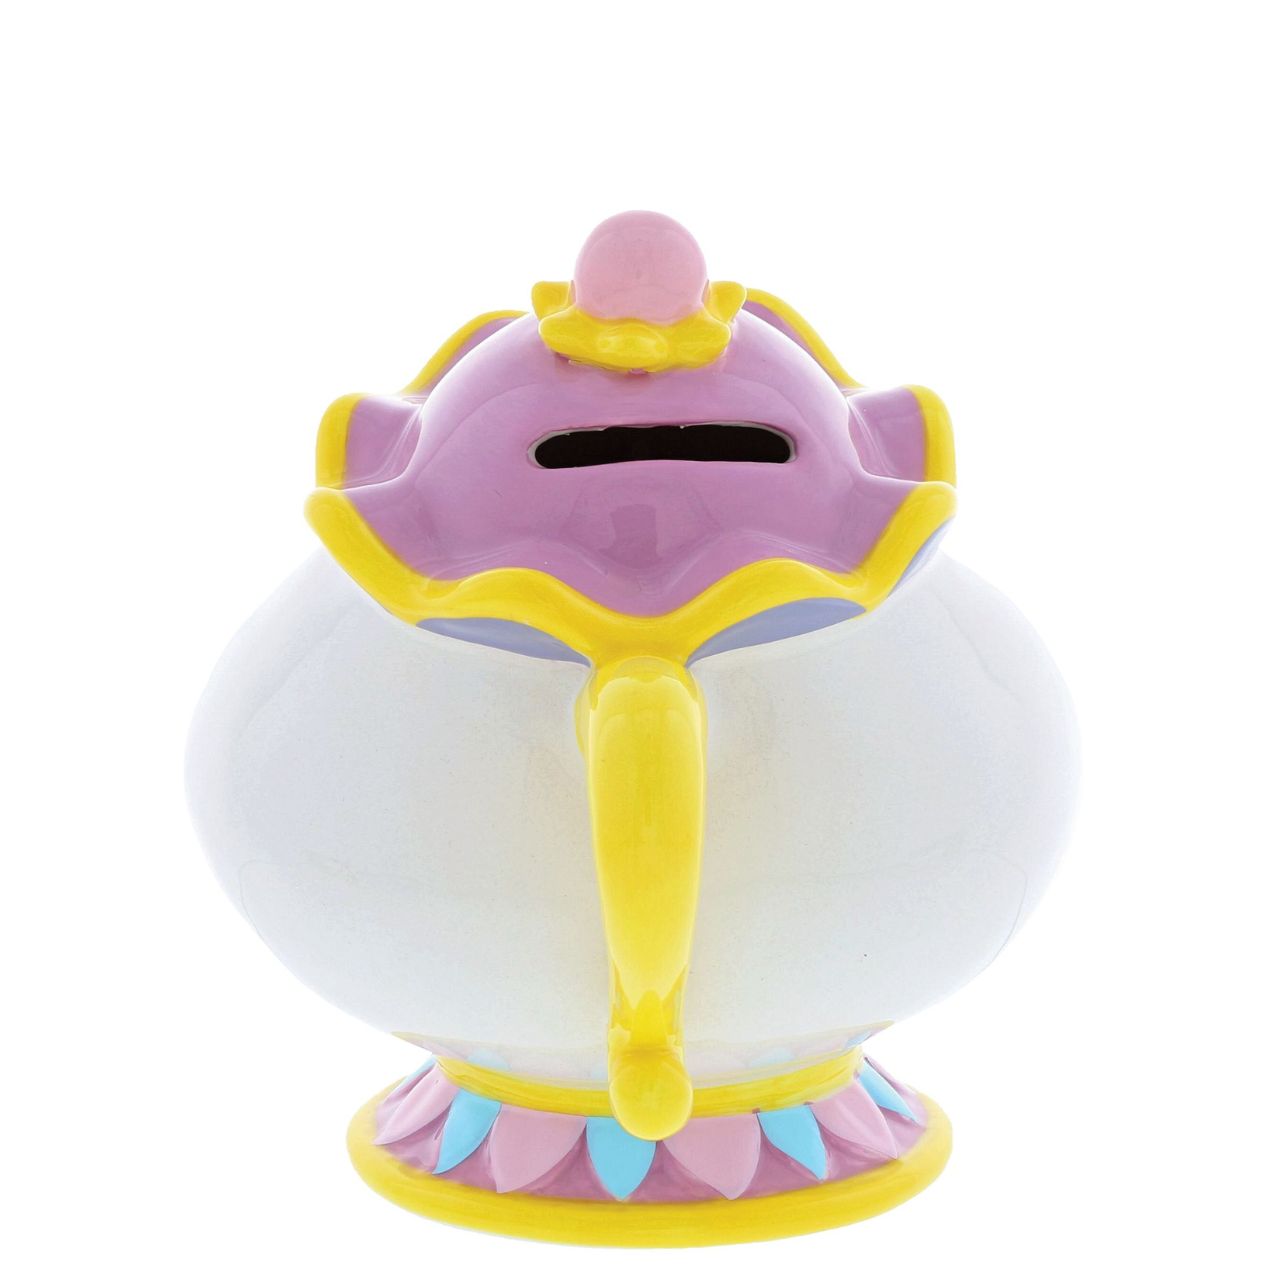 Mrs Potts Money Bank Money - Something There  There may be something there that wasn't there before. This iconic quote from the classic animated Beauty and the Beast film is definitely true when you are saving in this Mrs Potts money bank. Only available from the Enchanting Disney Collection and is a perfect gift for any occasion or as a treat for yourself.